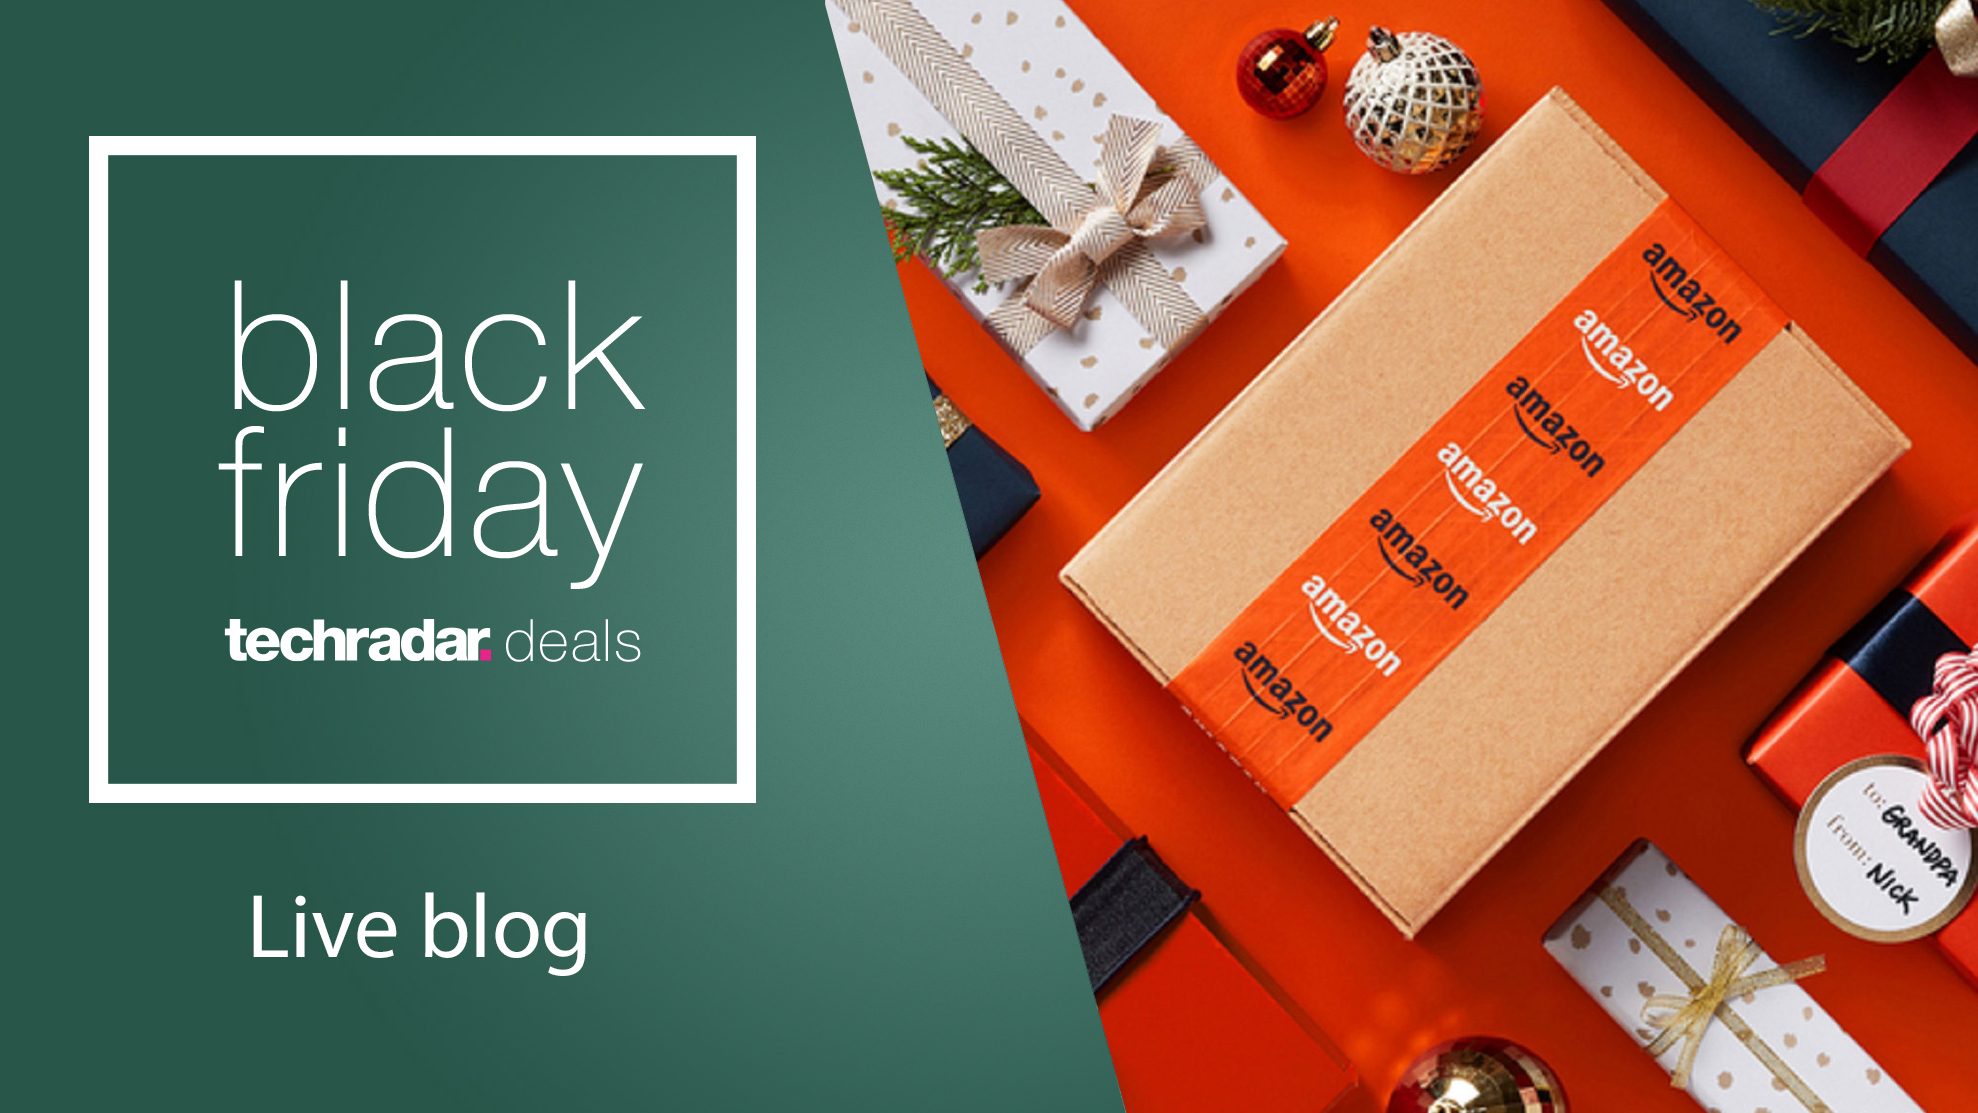 'Black Friday TechRadar deals' text, with a close up of an Amazon parcel